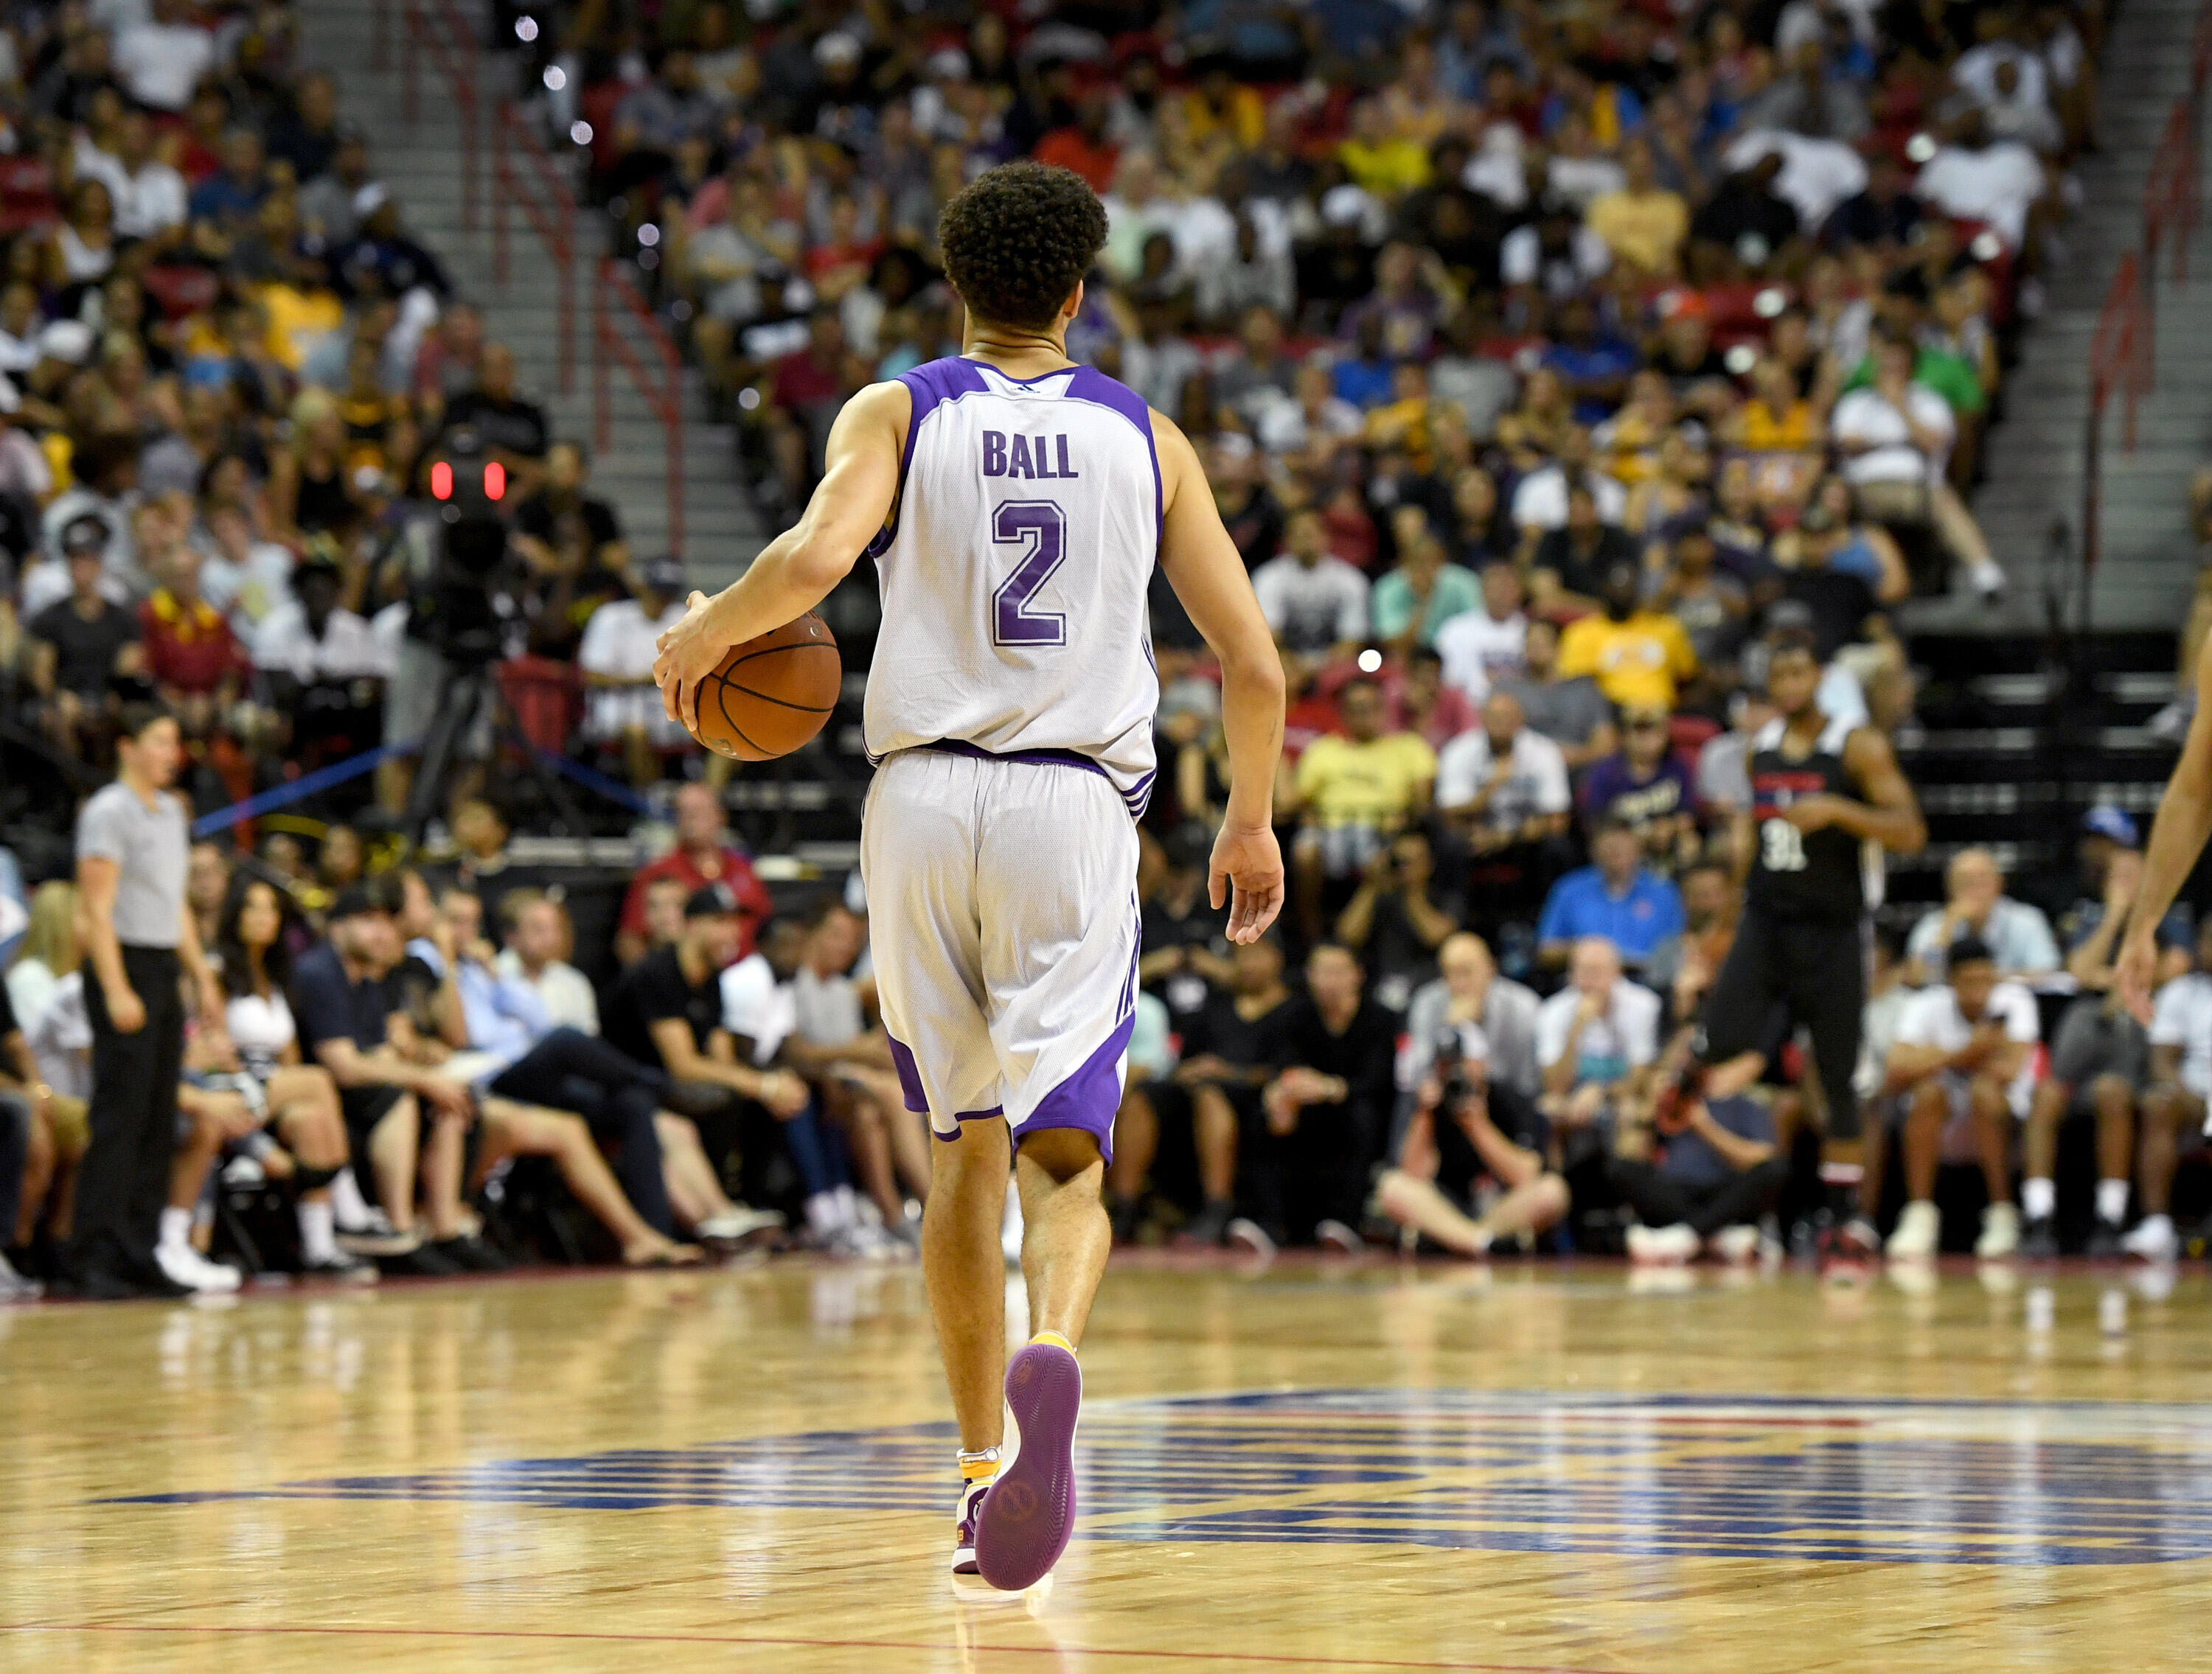 LAS VEGAS, NV - JULY 07:  Lonzo Ball #2 of the Los Angeles Lakers brings the ball up the court against the Los Angeles Clippers during the 2017 Summer League at the Thomas & Mack Center on July 7, 2017 in Las Vegas, Nevada. The Clippers won 96-93 in overt